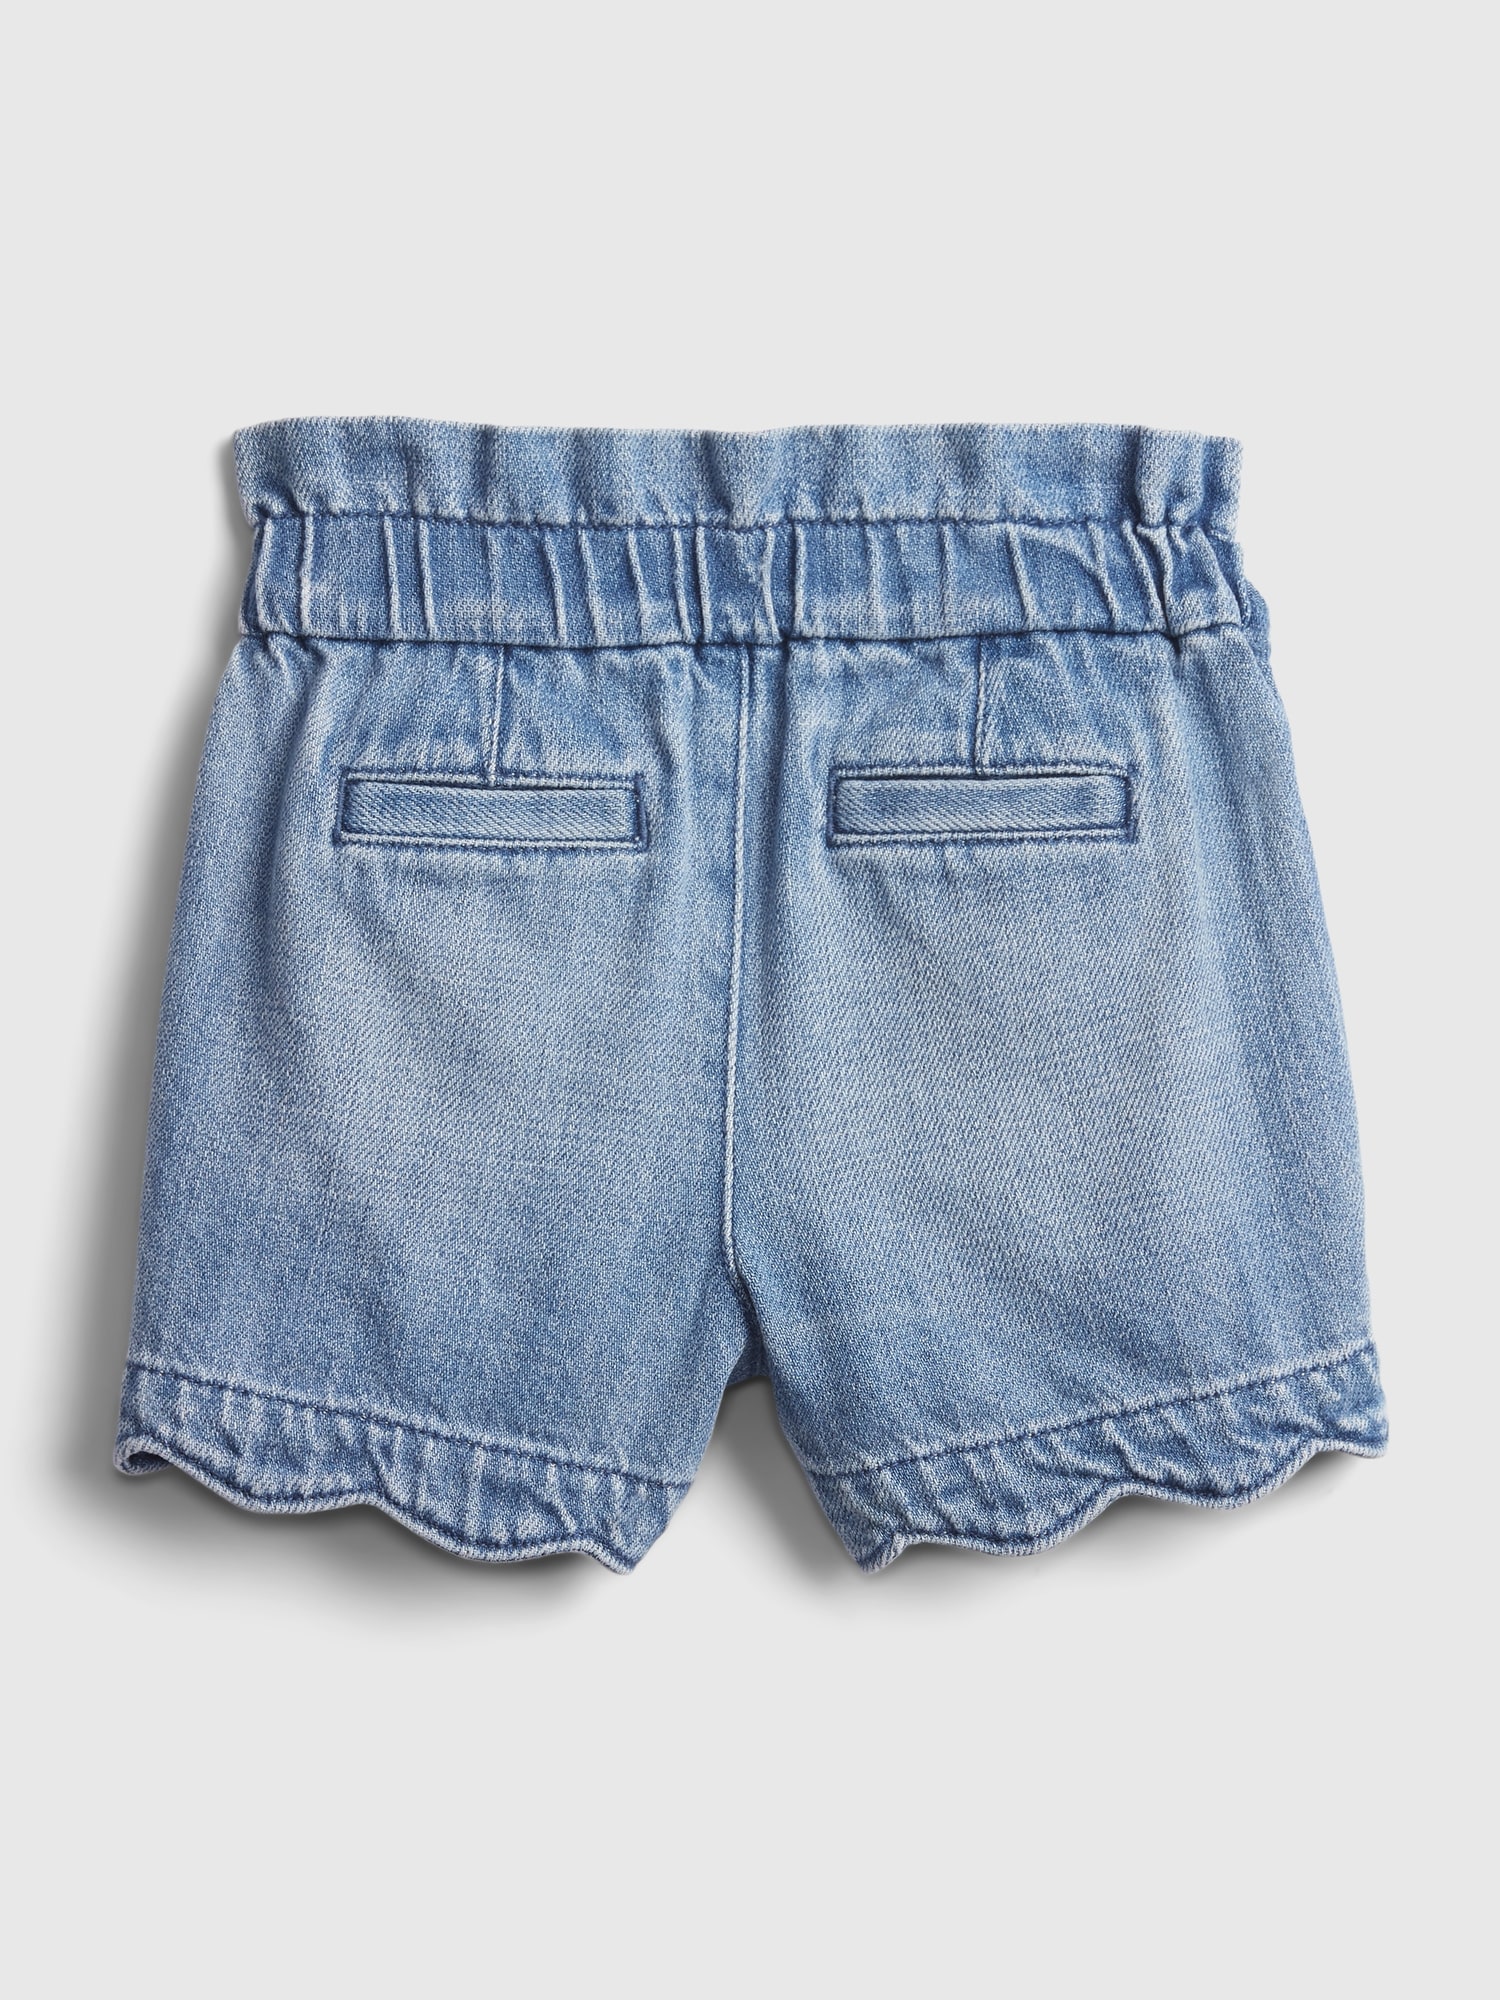 Toddler Scalloped Pull-On Denim Shorts with Washwell™ | Gap